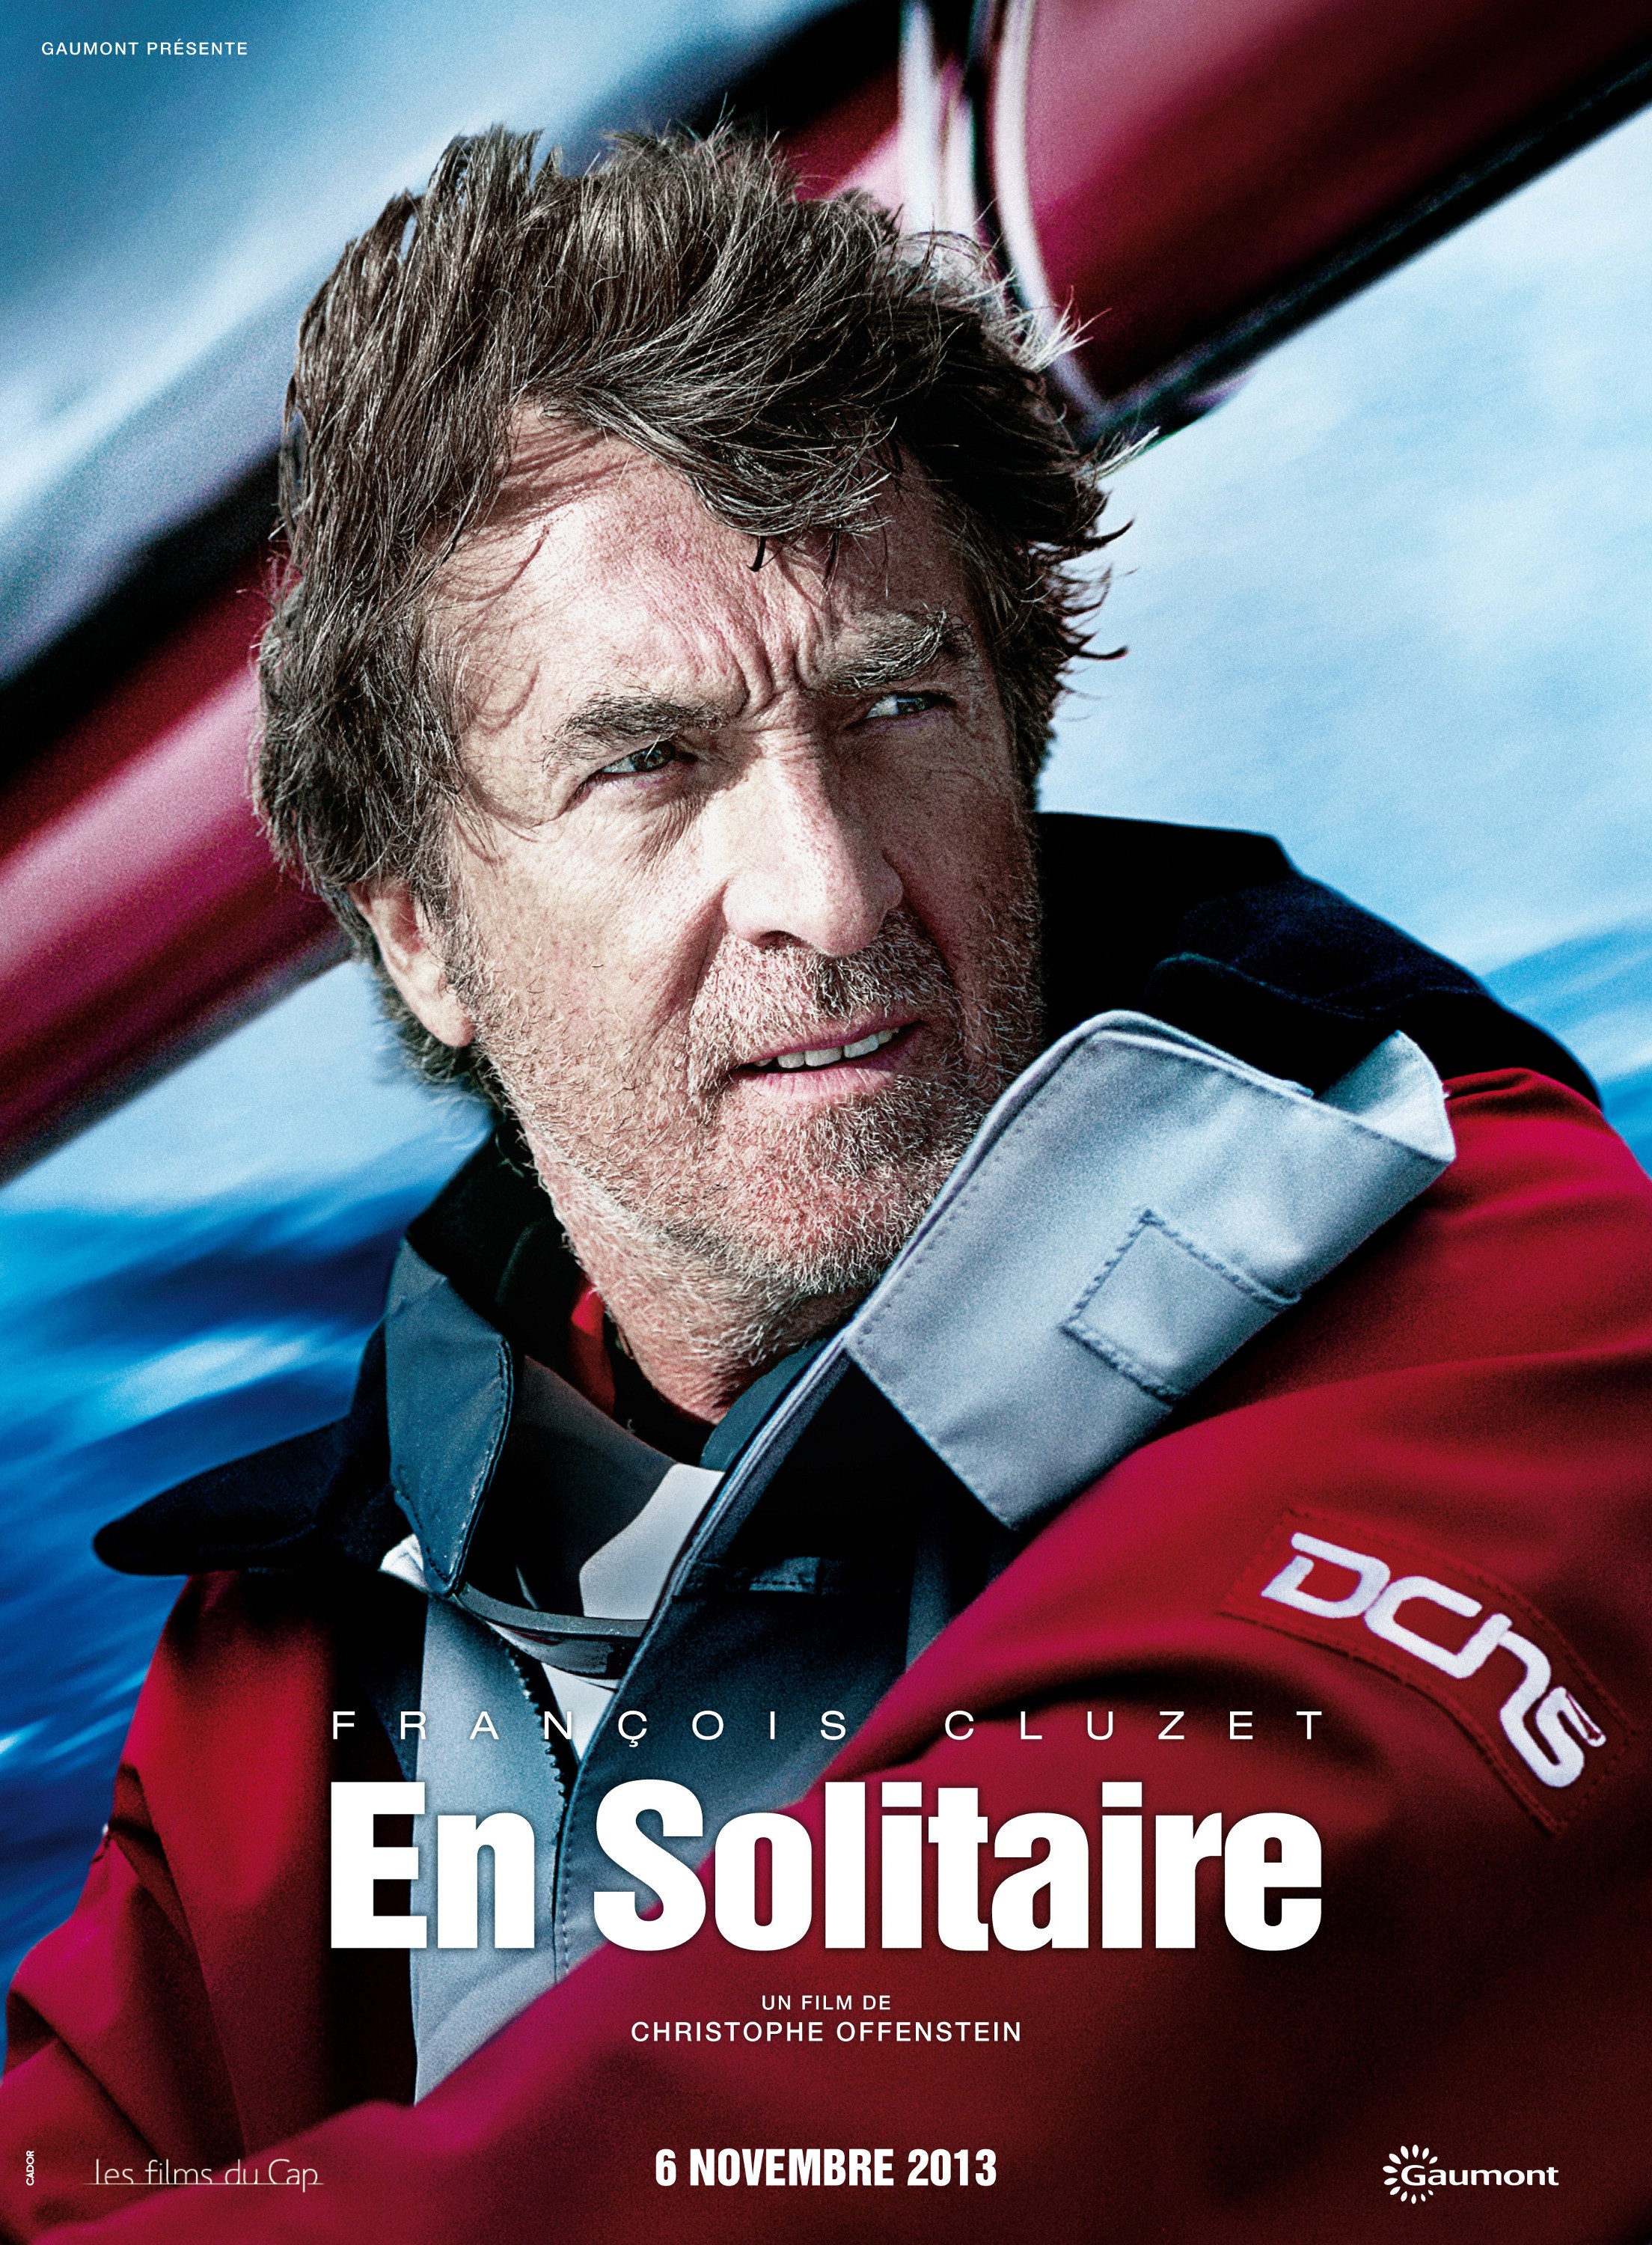 Mega Sized Movie Poster Image for En solitaire (#1 of 2)